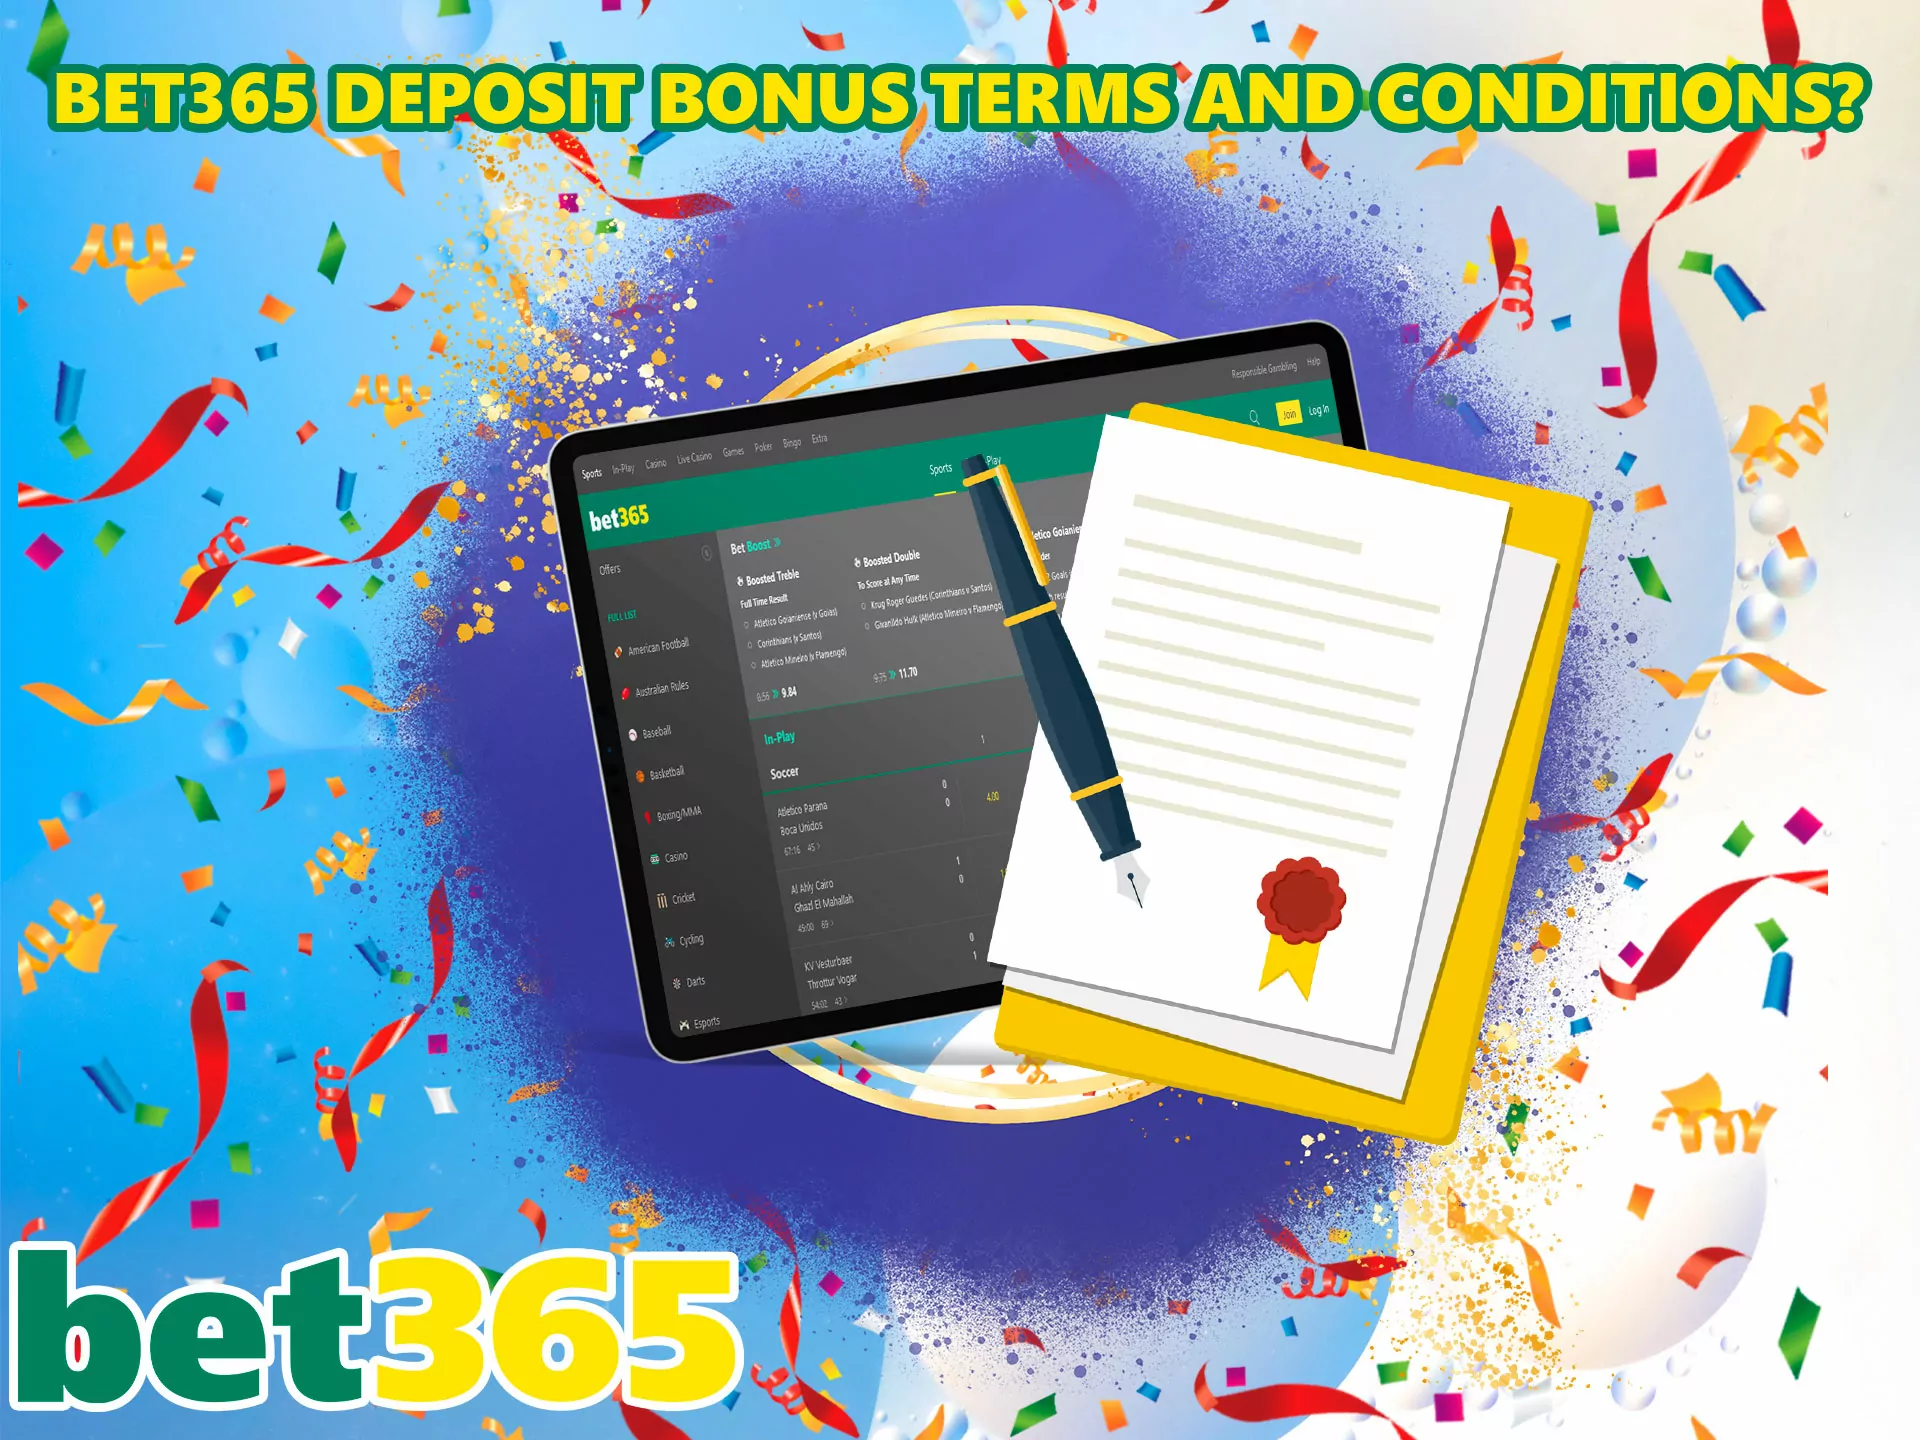 You need to replenish the qualifying deposit for its amount, thus you will unlock Betbonuses in Bet365.